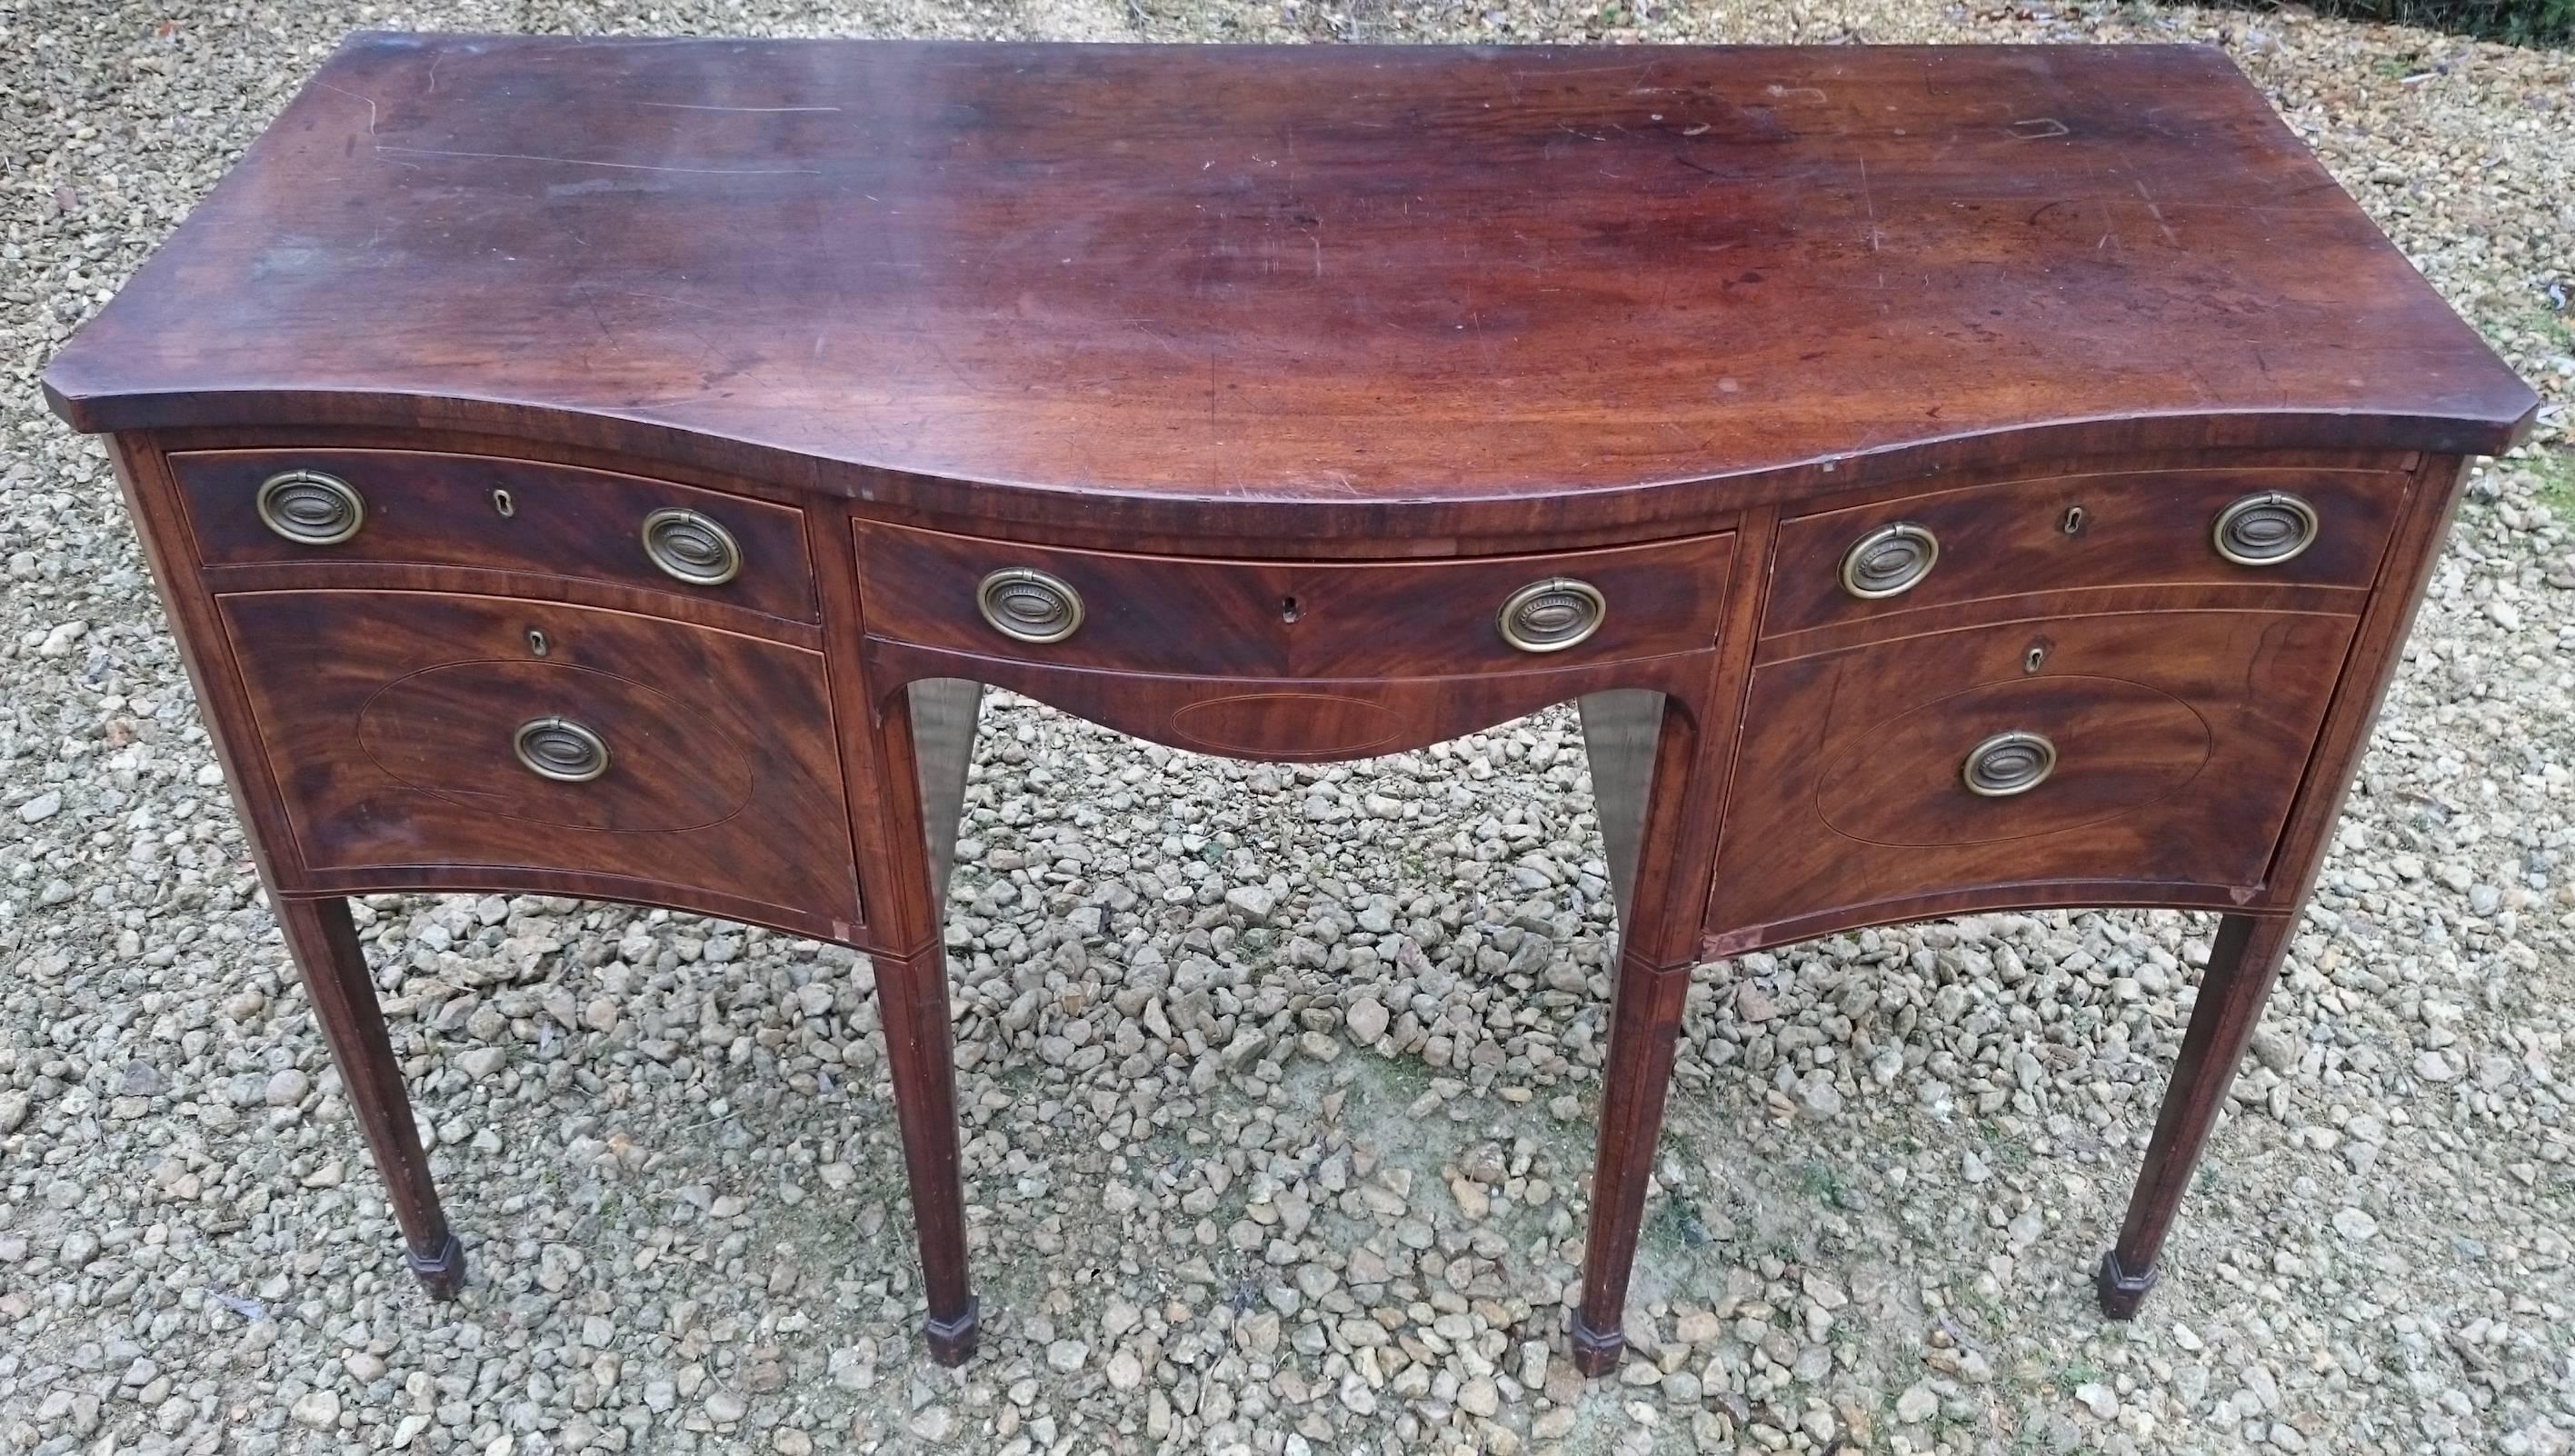 George III period mahogany serpentine fronted sideboard. This sideboard has a wonderful patina that will come up very nicely when our workshop had buffed it with beeswax. The front is flame mahogany with stringing in box and ebony. The legs have an